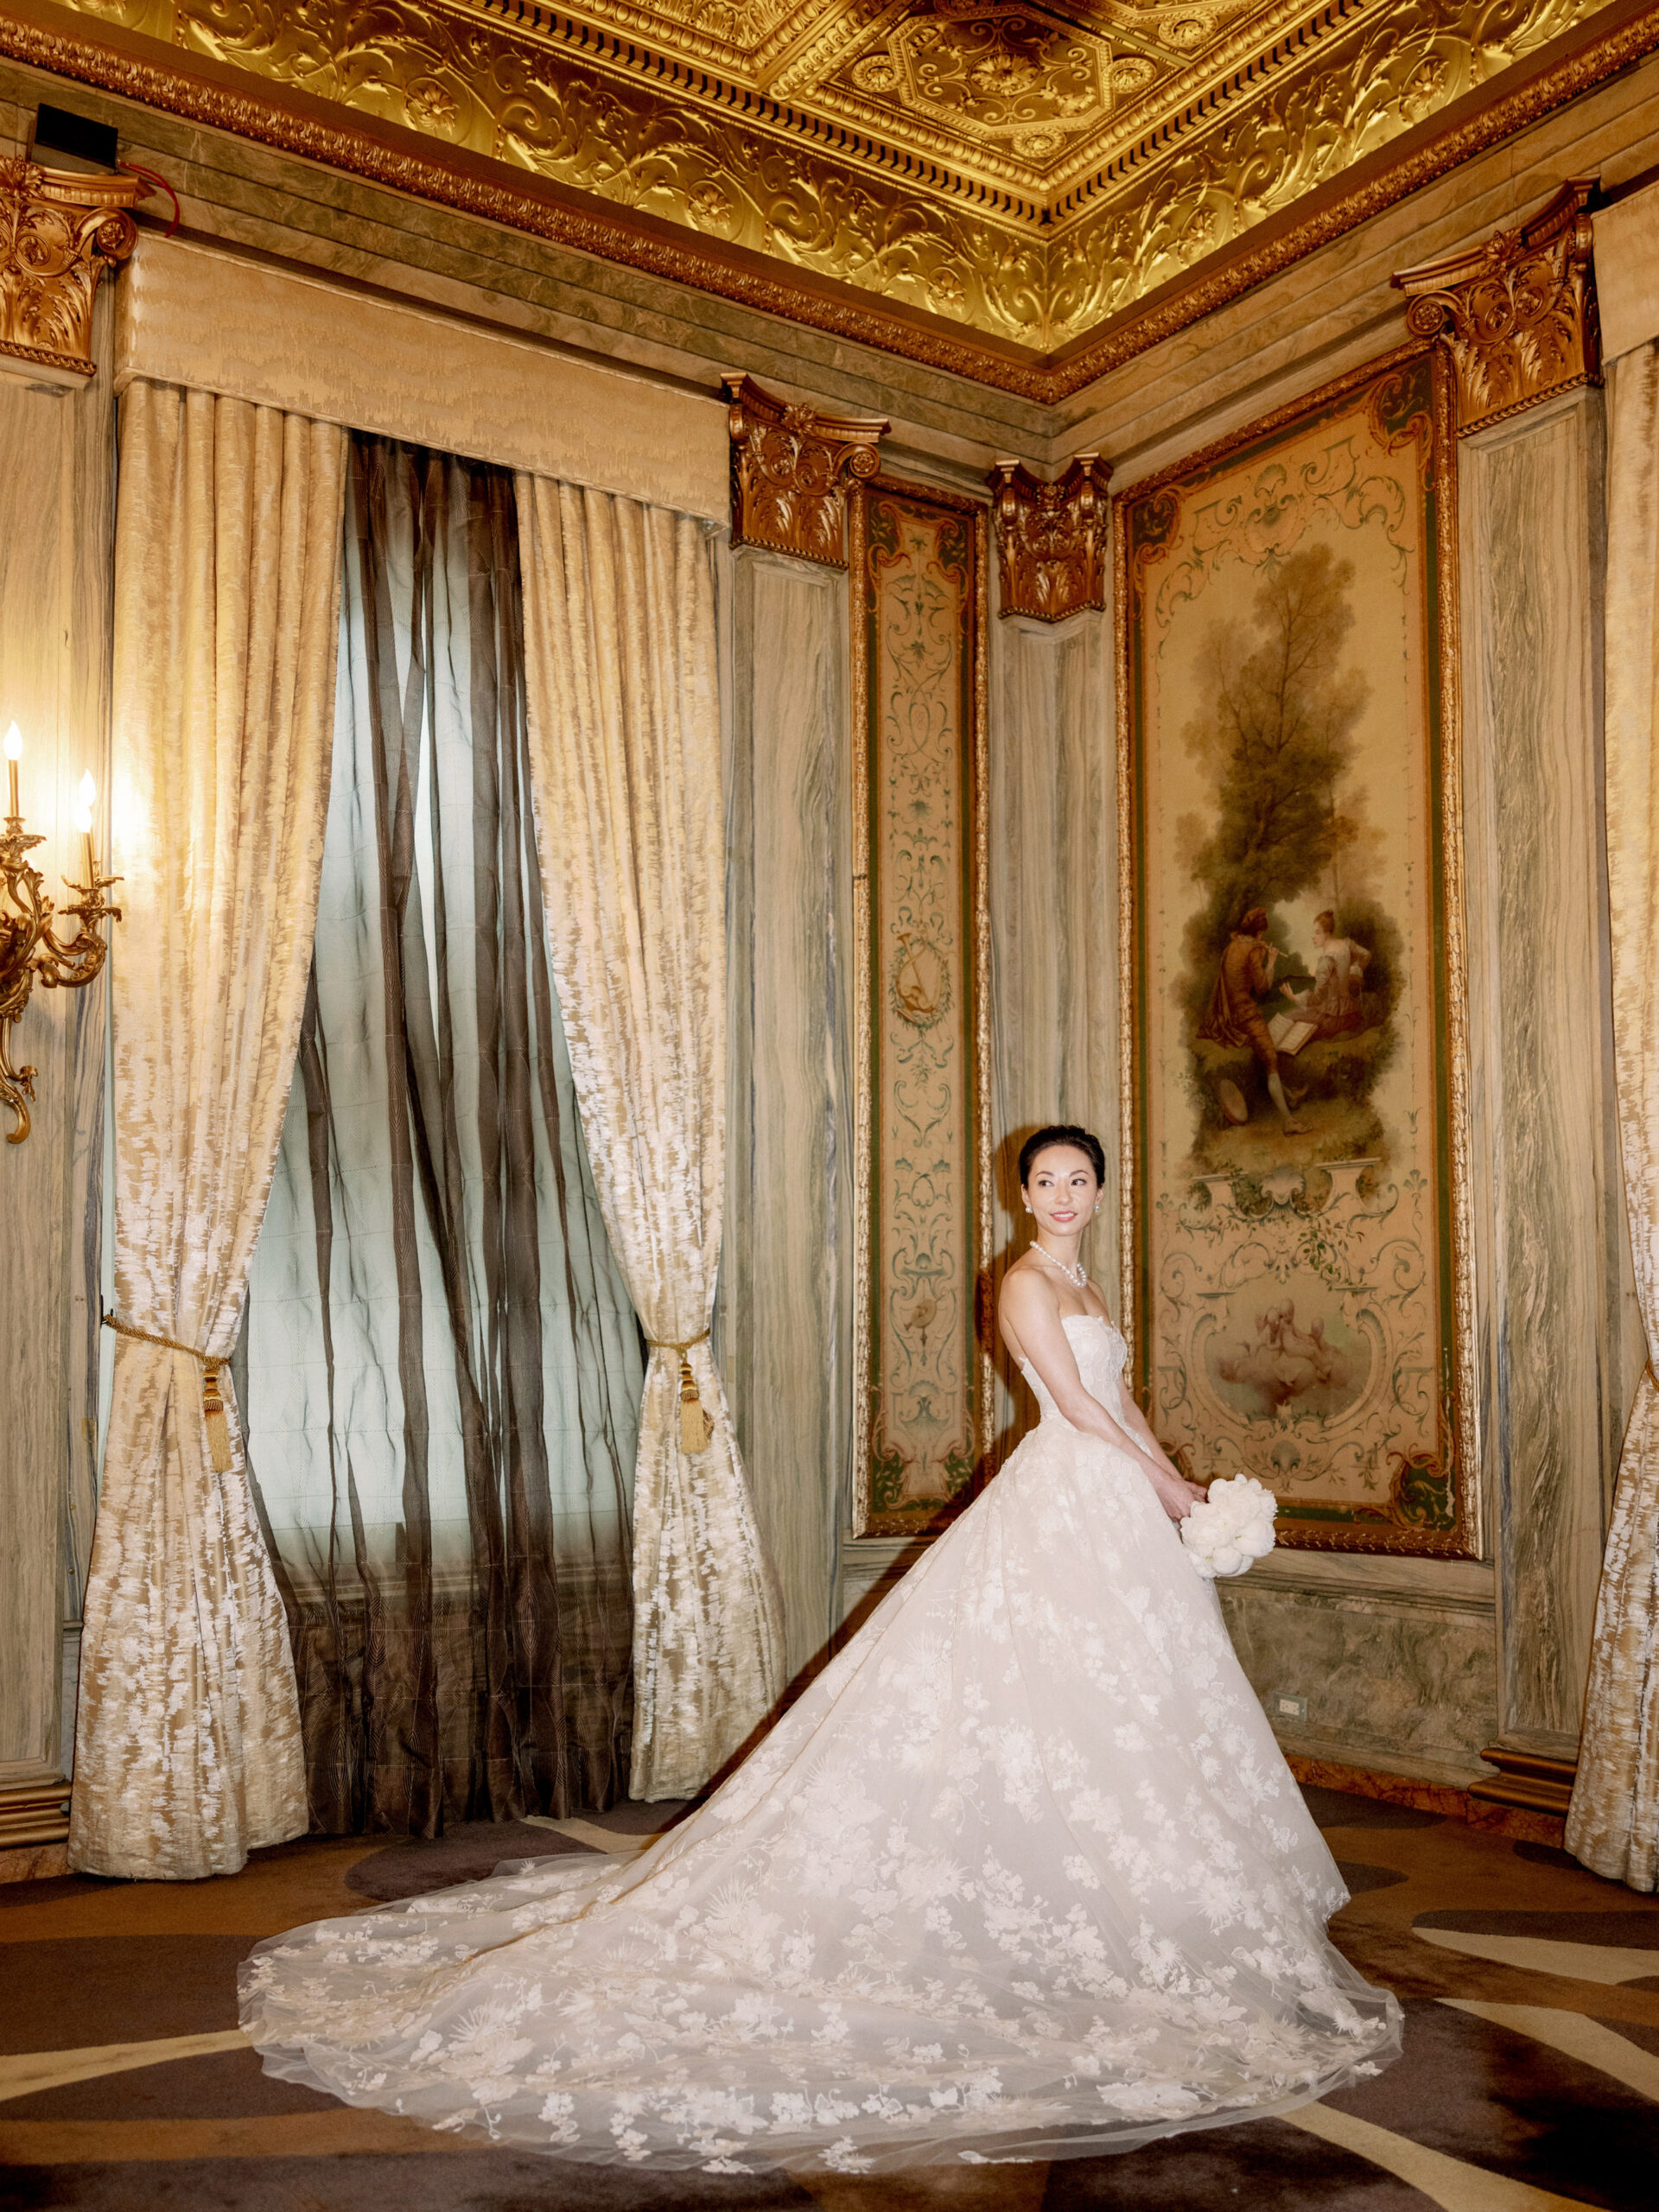 Editorial photo of the bride wearing a beautiful wedding dress inside a hotel. Image by Jenny Fu Studio